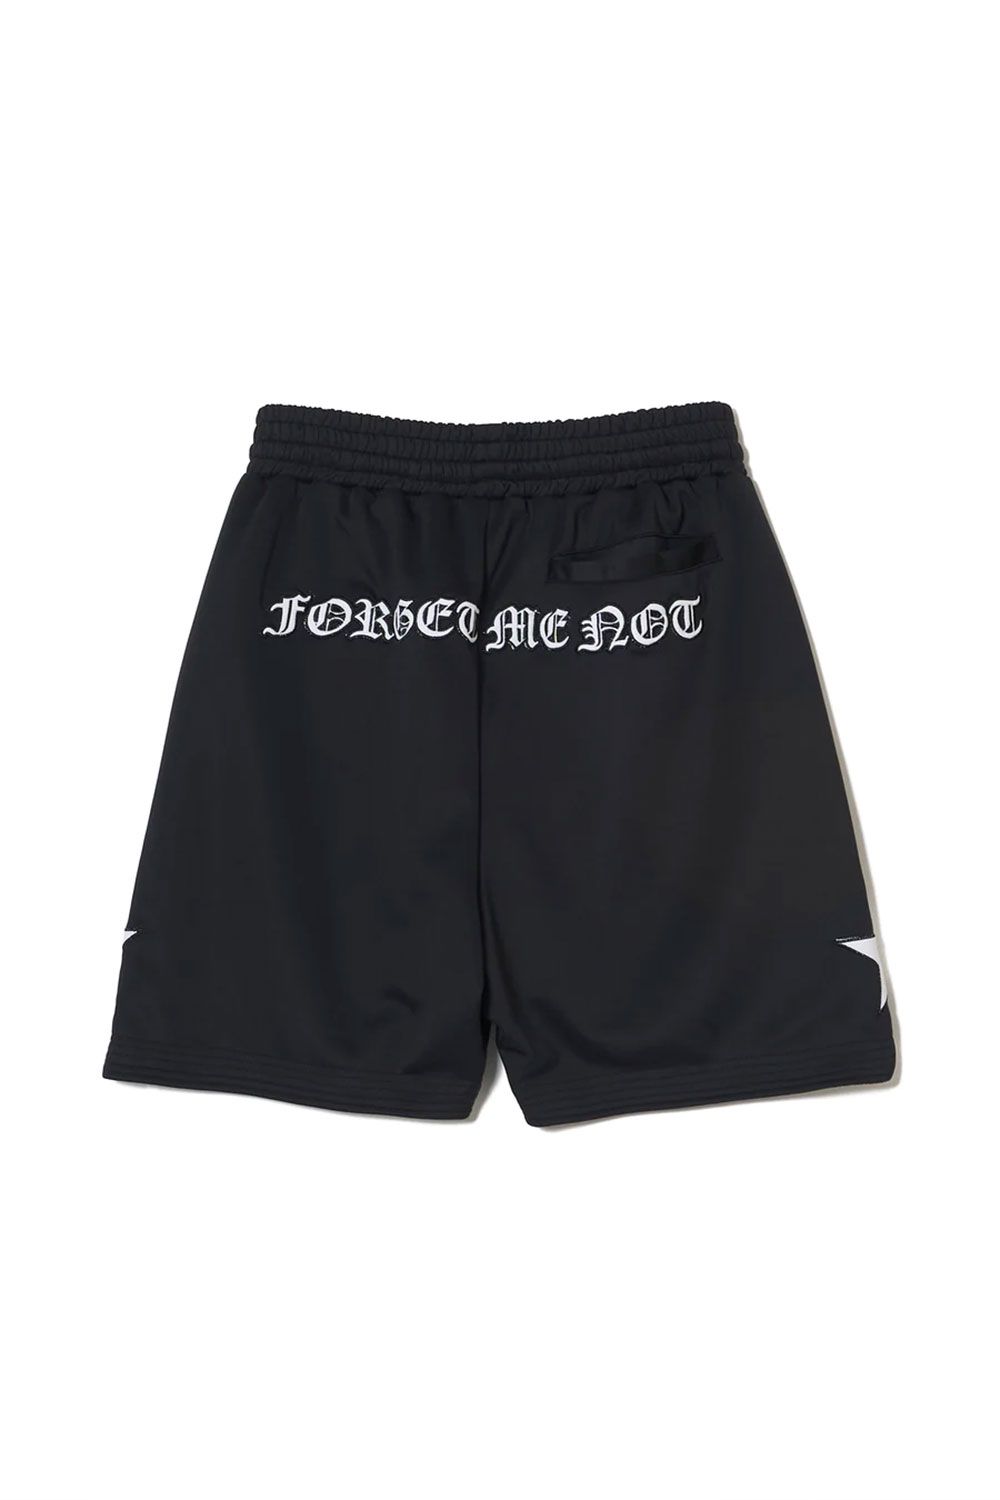 MAYO Embroidery Game Shorts / ブラック - M